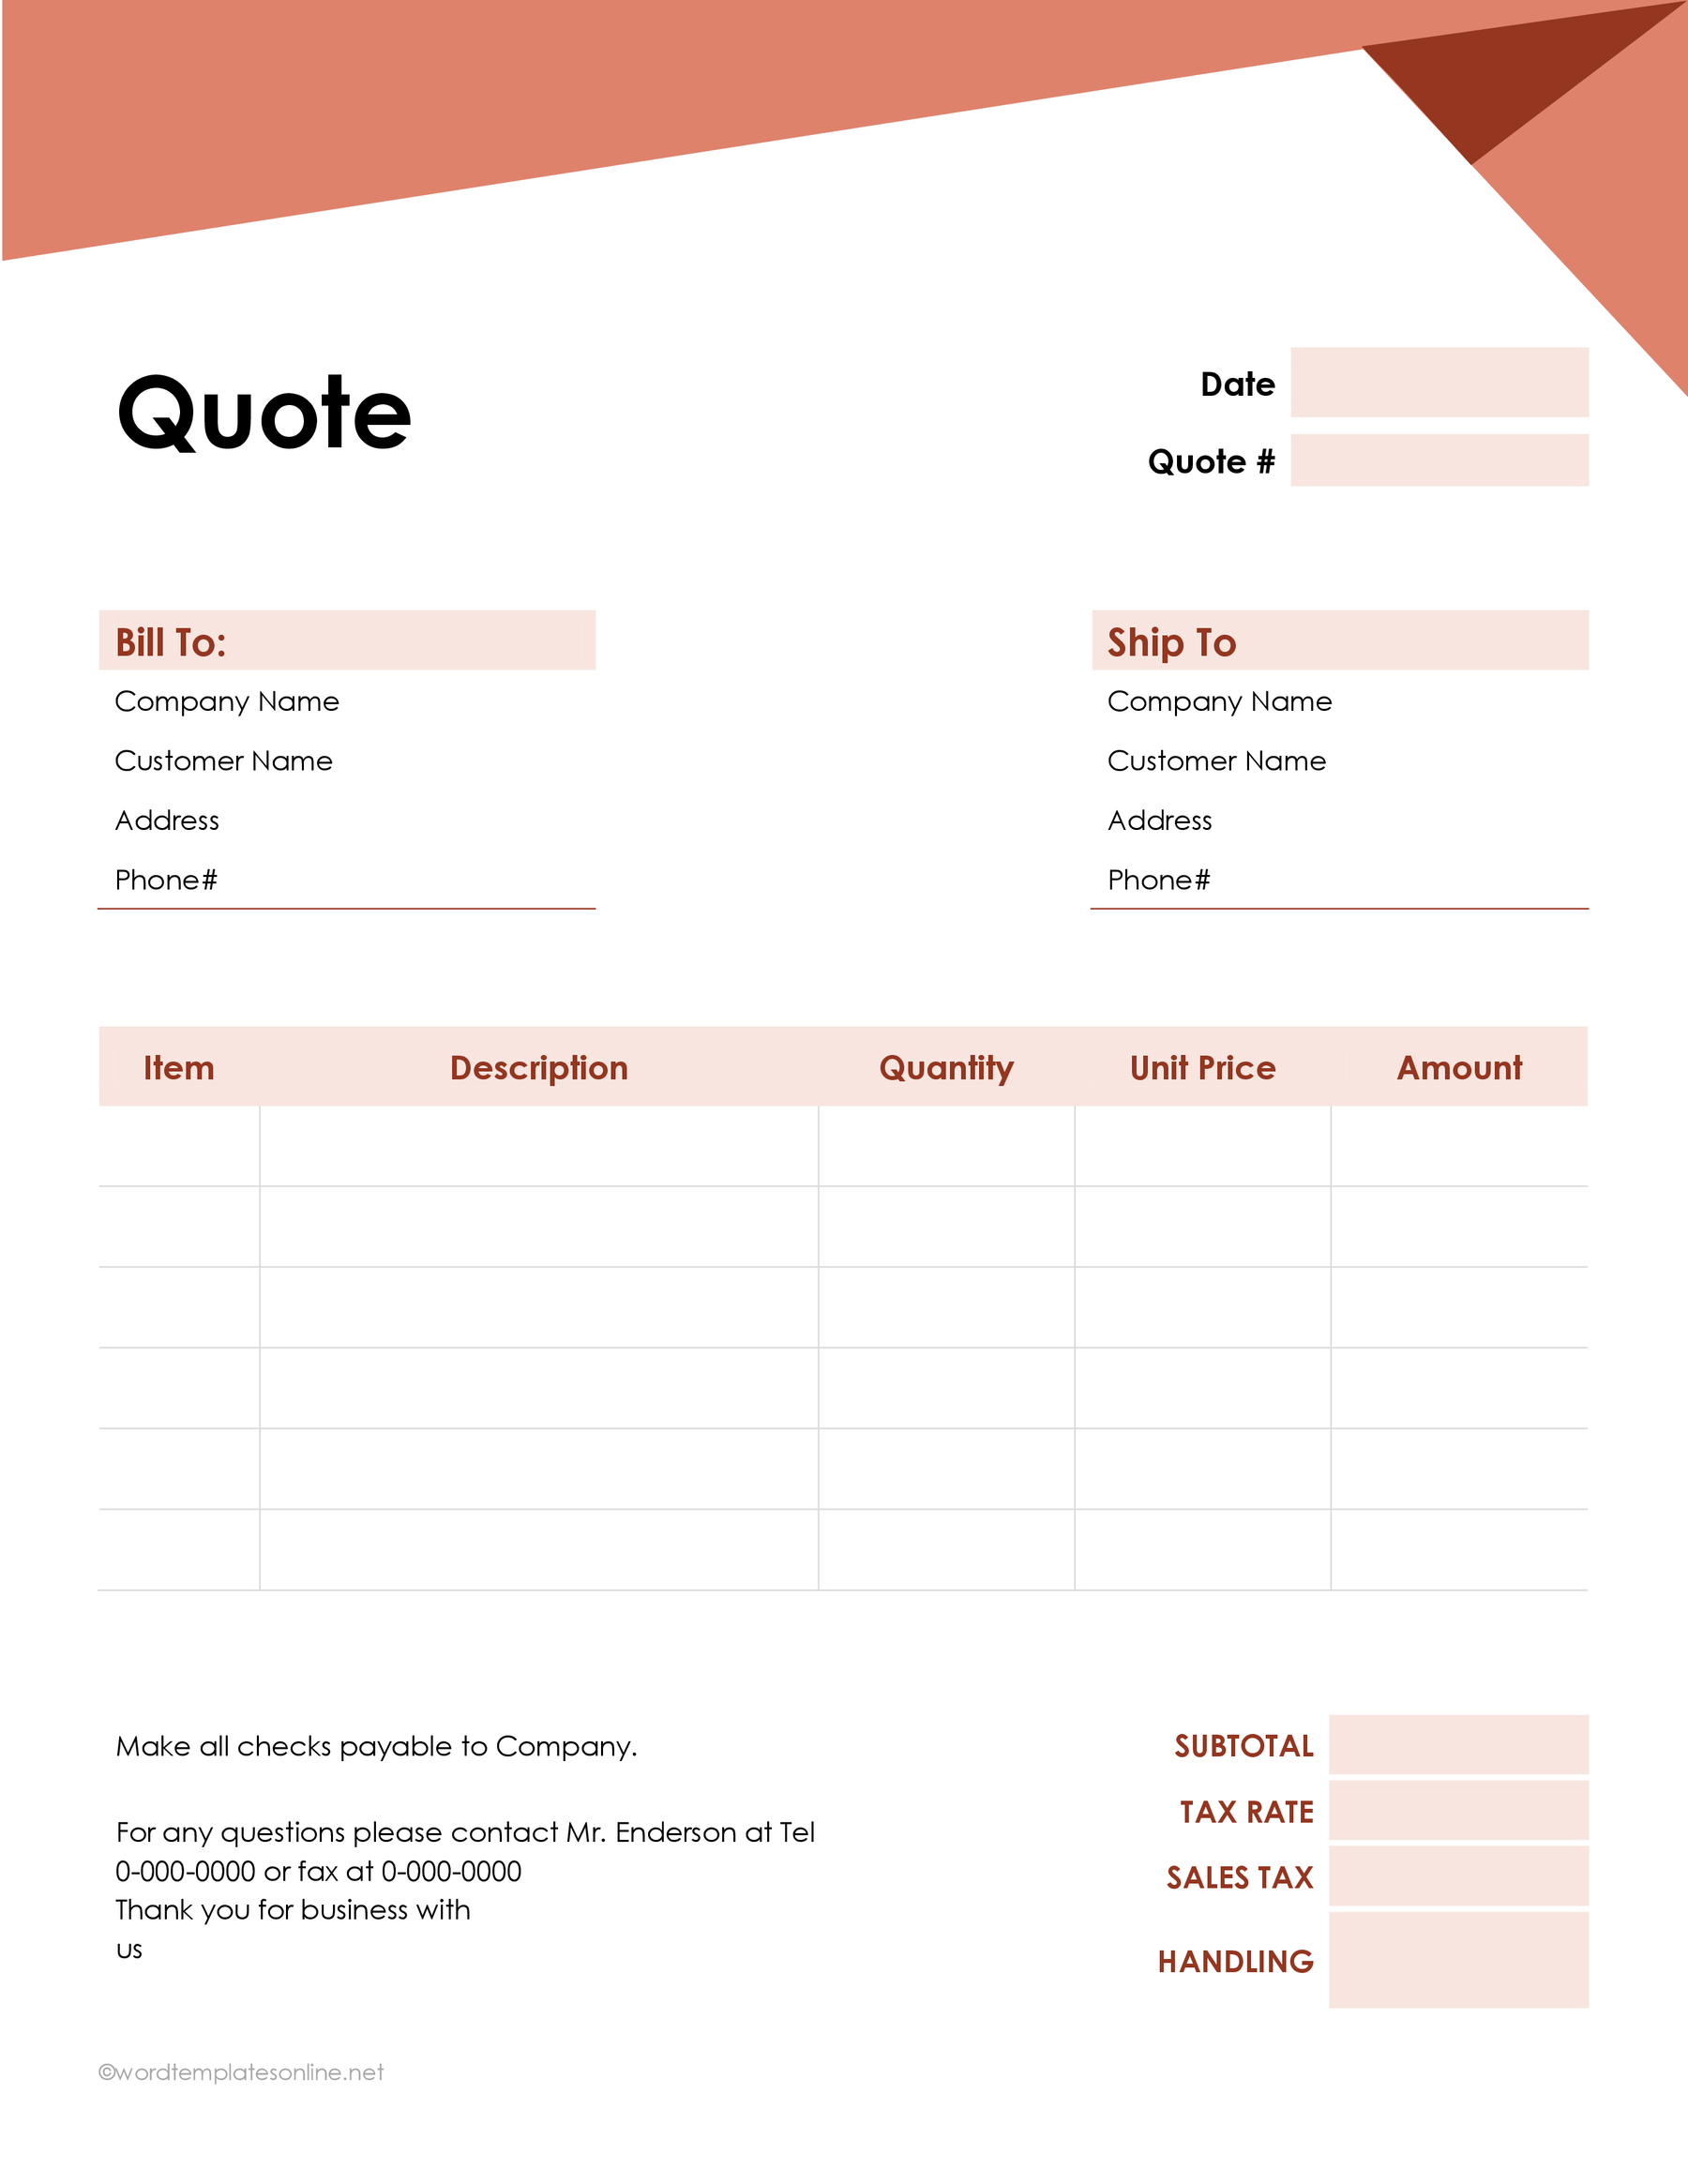 Quotation-Template-06-2021-03